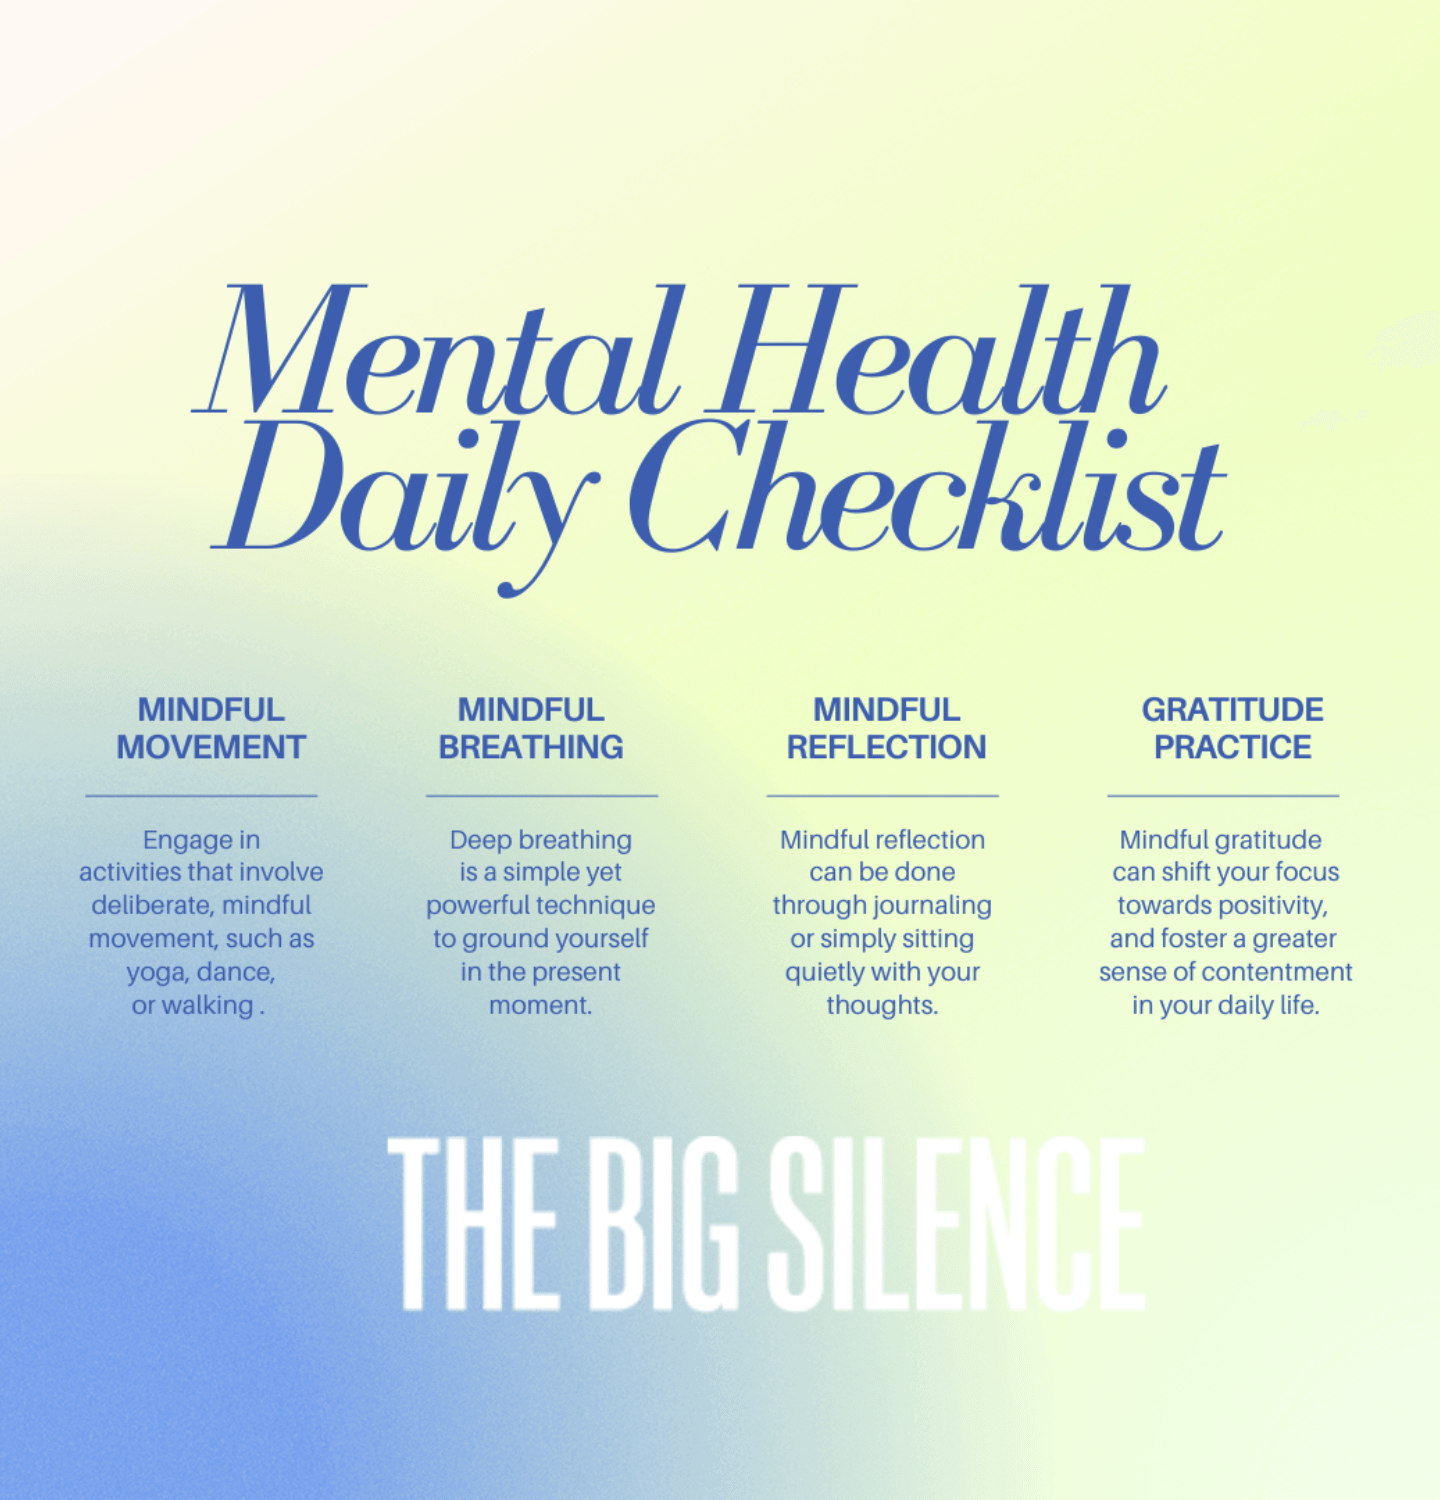 Blue and yellow background with text featuring suggestions for daily mental health management